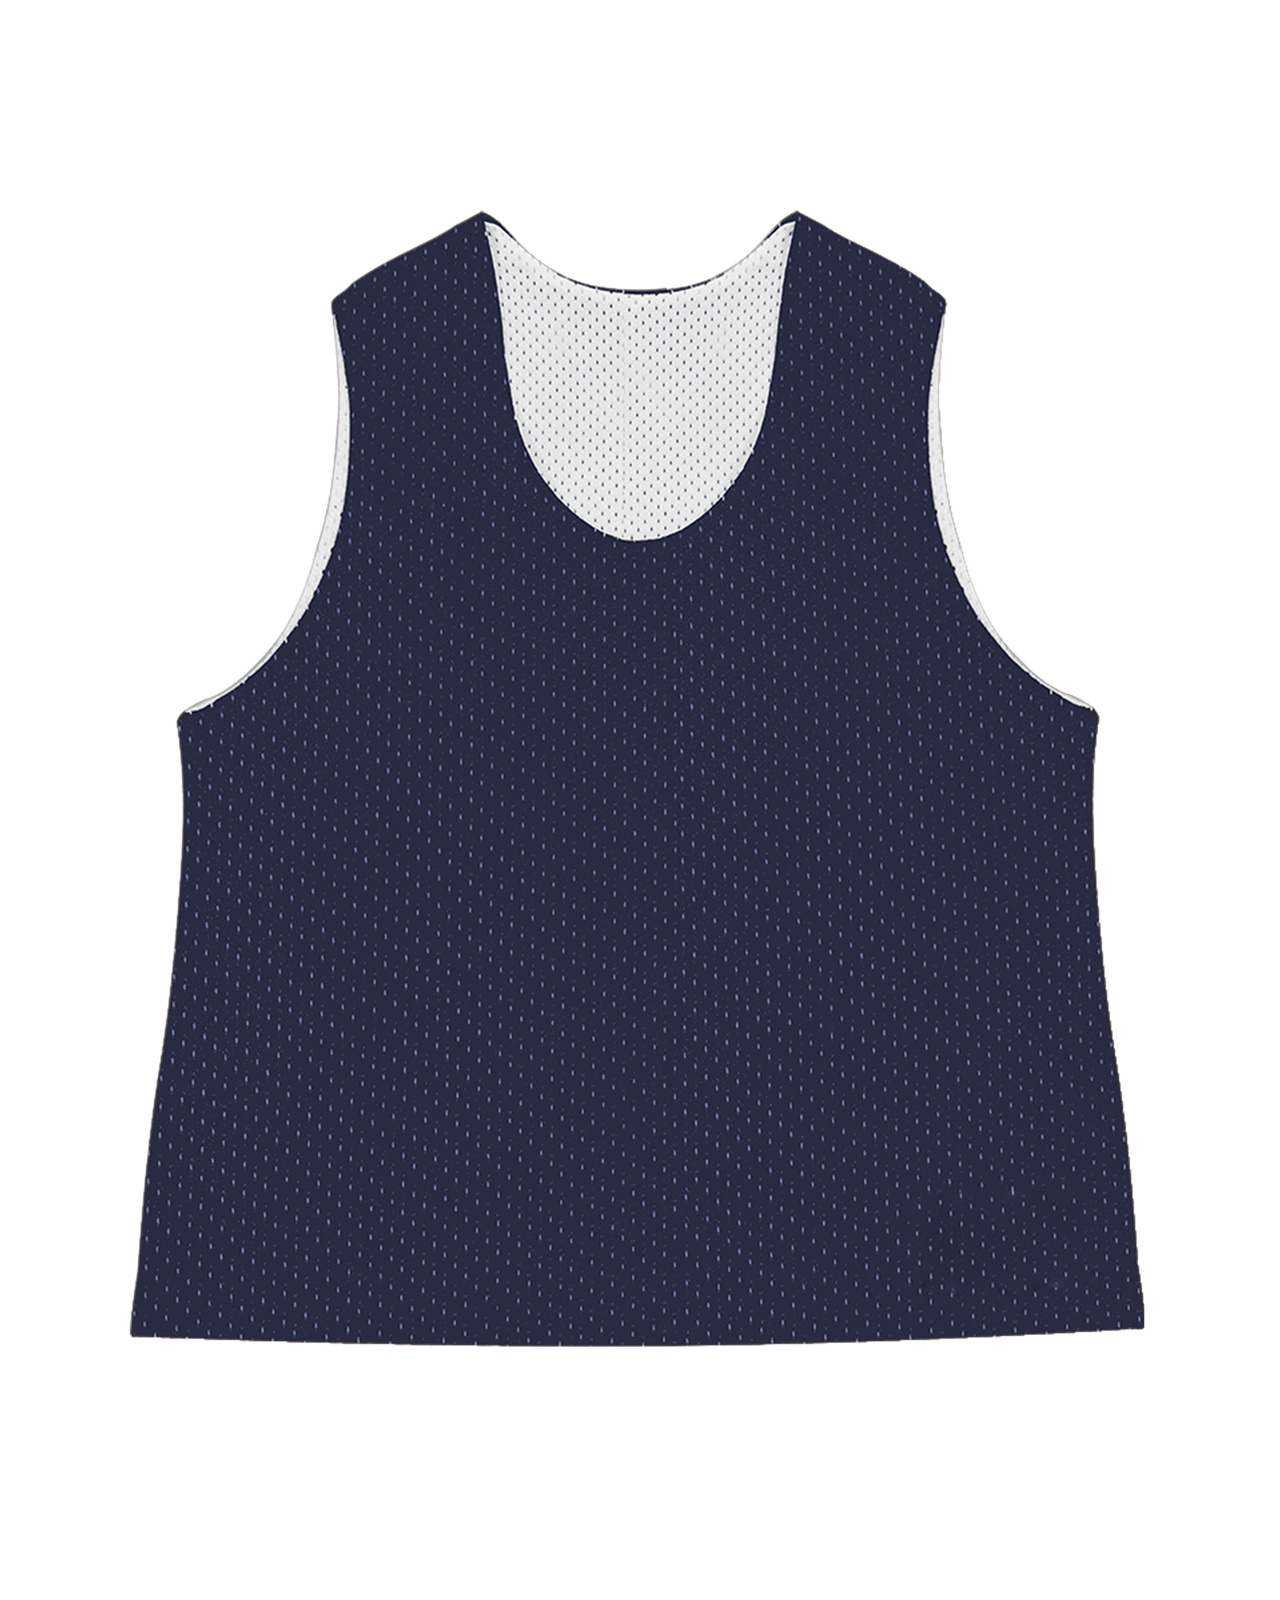 C2 Sport 5260 Mesh Reversible Youth Pinnie - Navy White - HIT a Double - 1